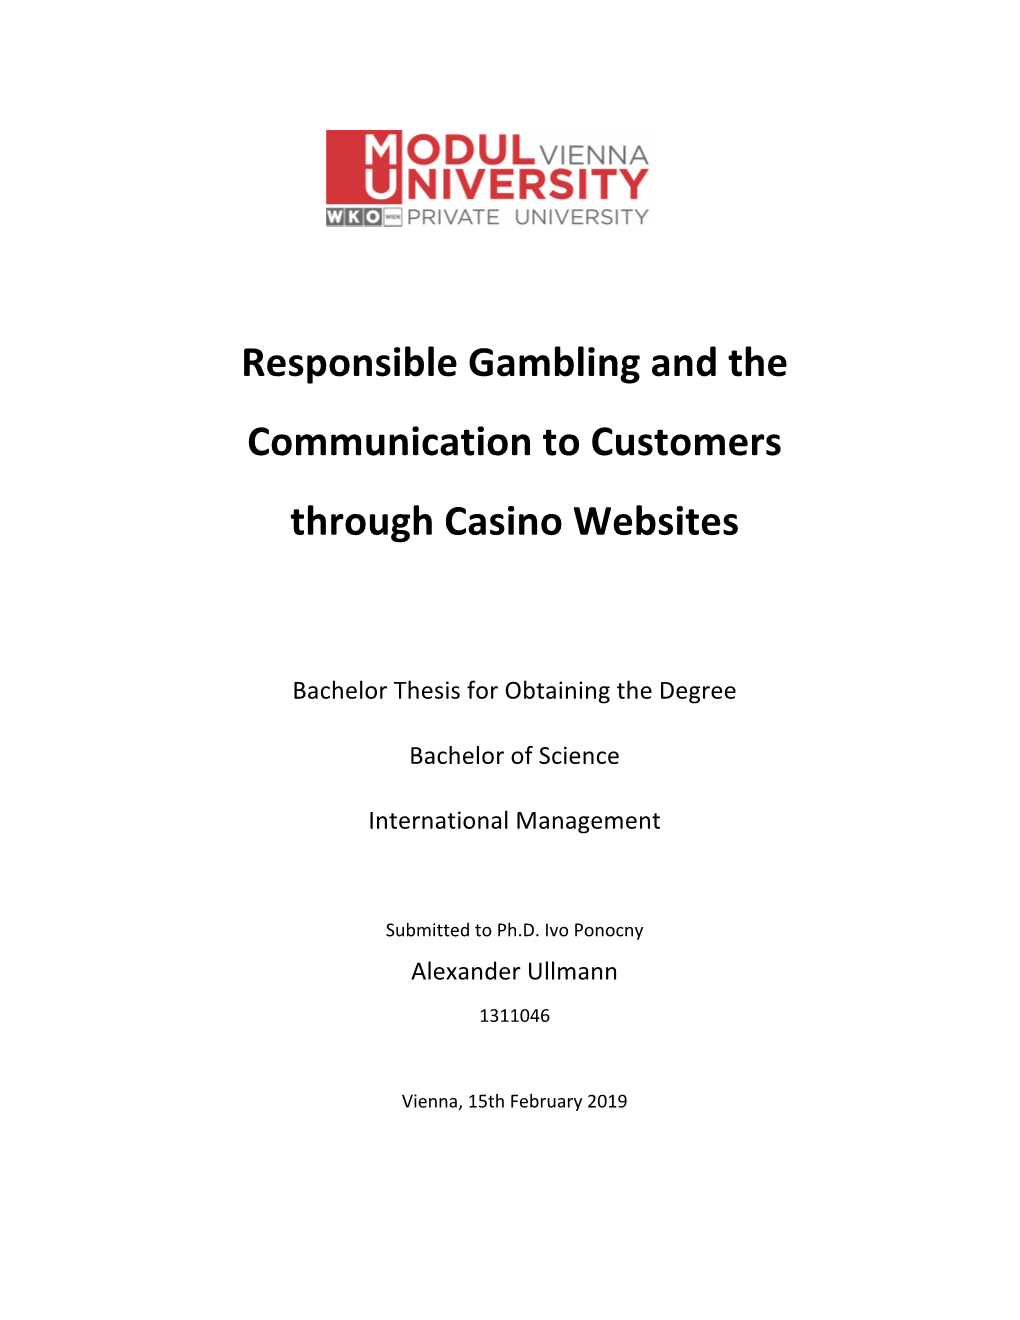 Responsible Gambling and the Communication to Customers Through Casino Websites